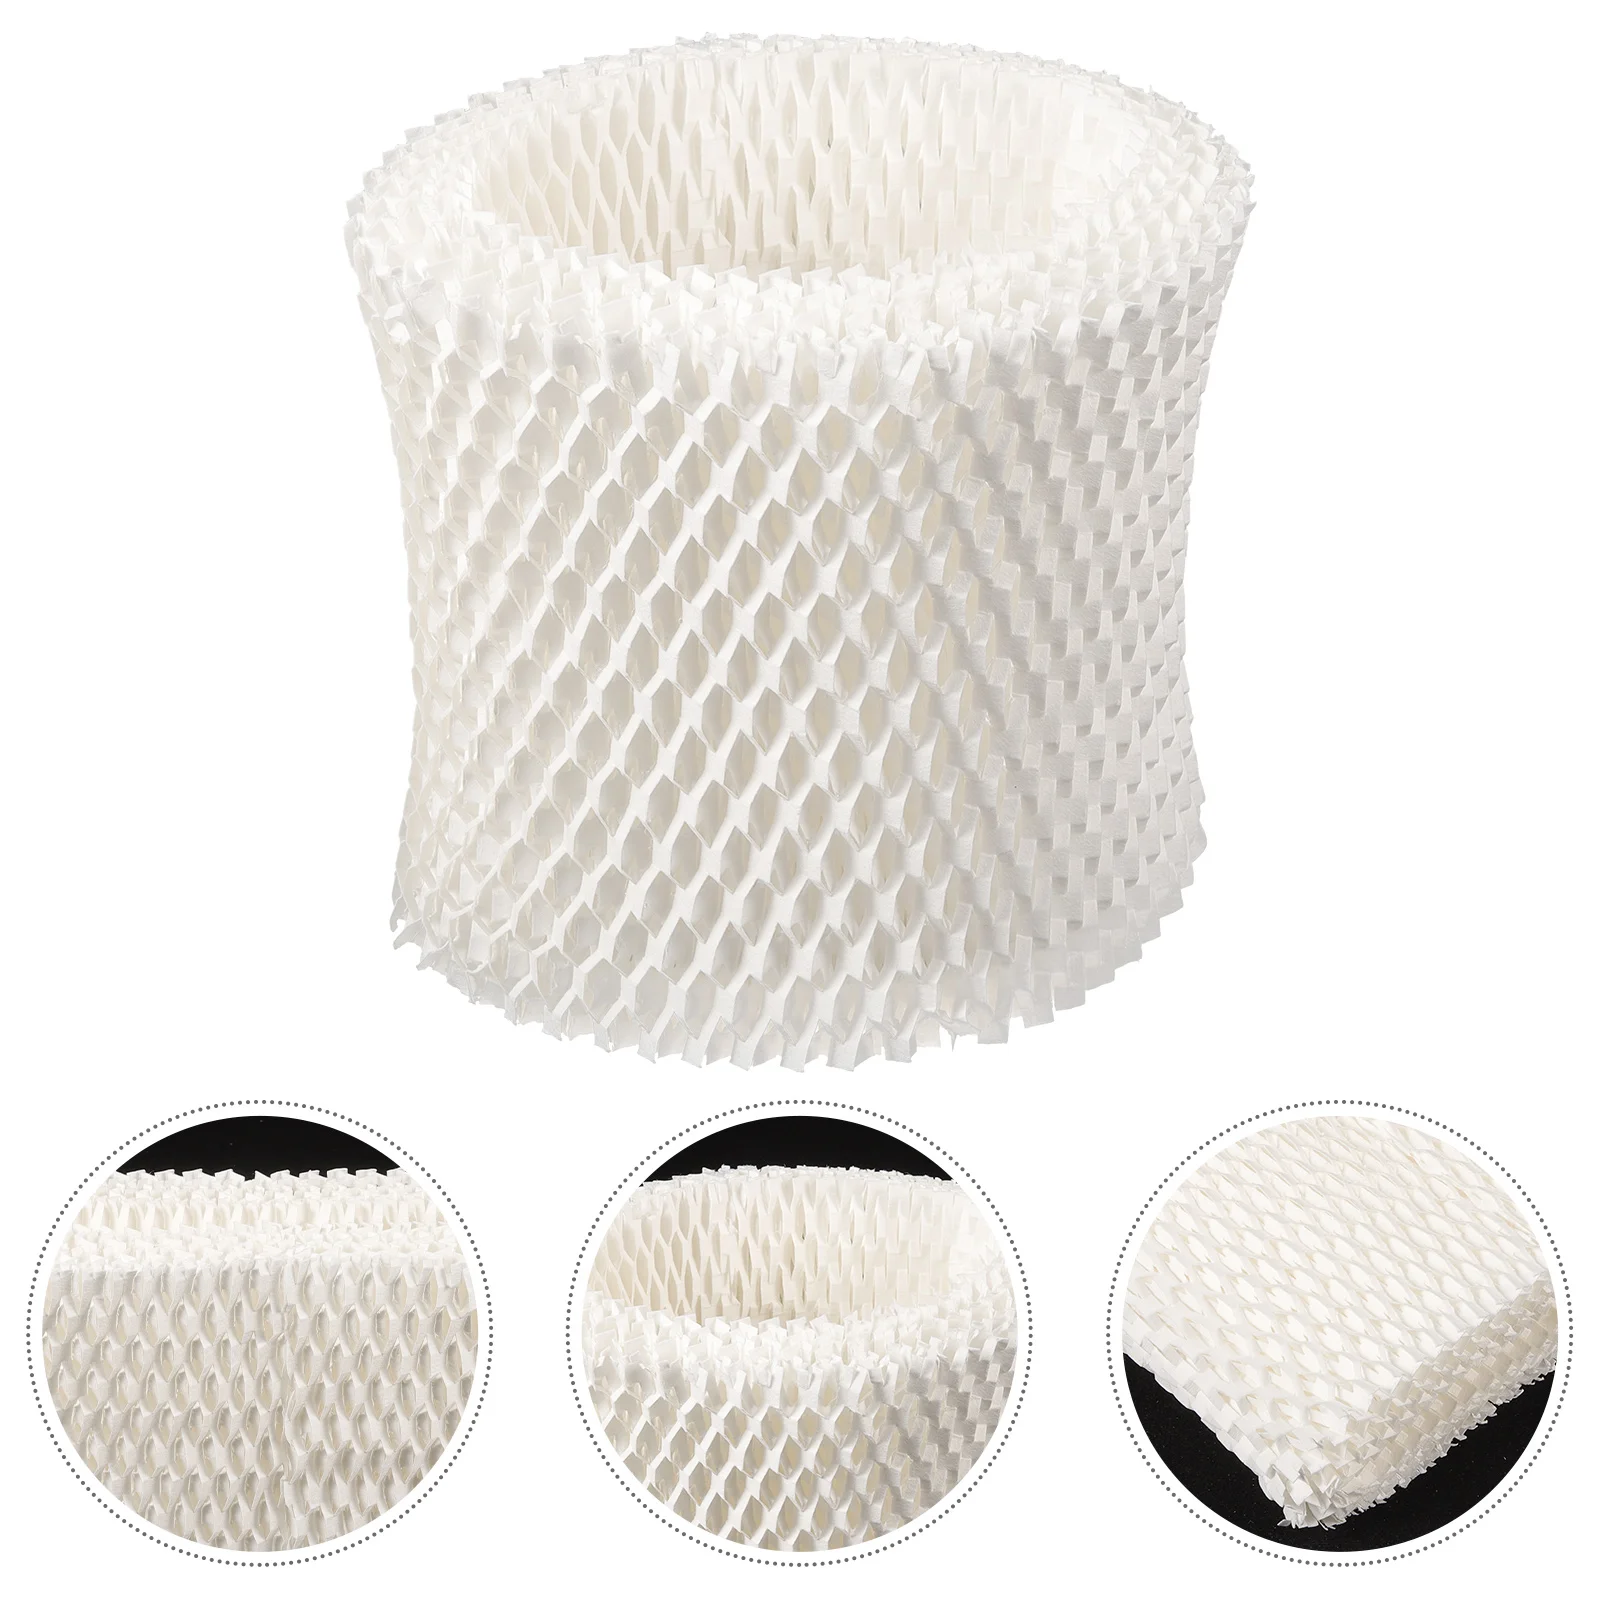 

2 Pcs Strainer Replaceable Humidifier Filter Honeycomb Accessory Wood Pulp Paper Durable Household Wicking Tool Professional